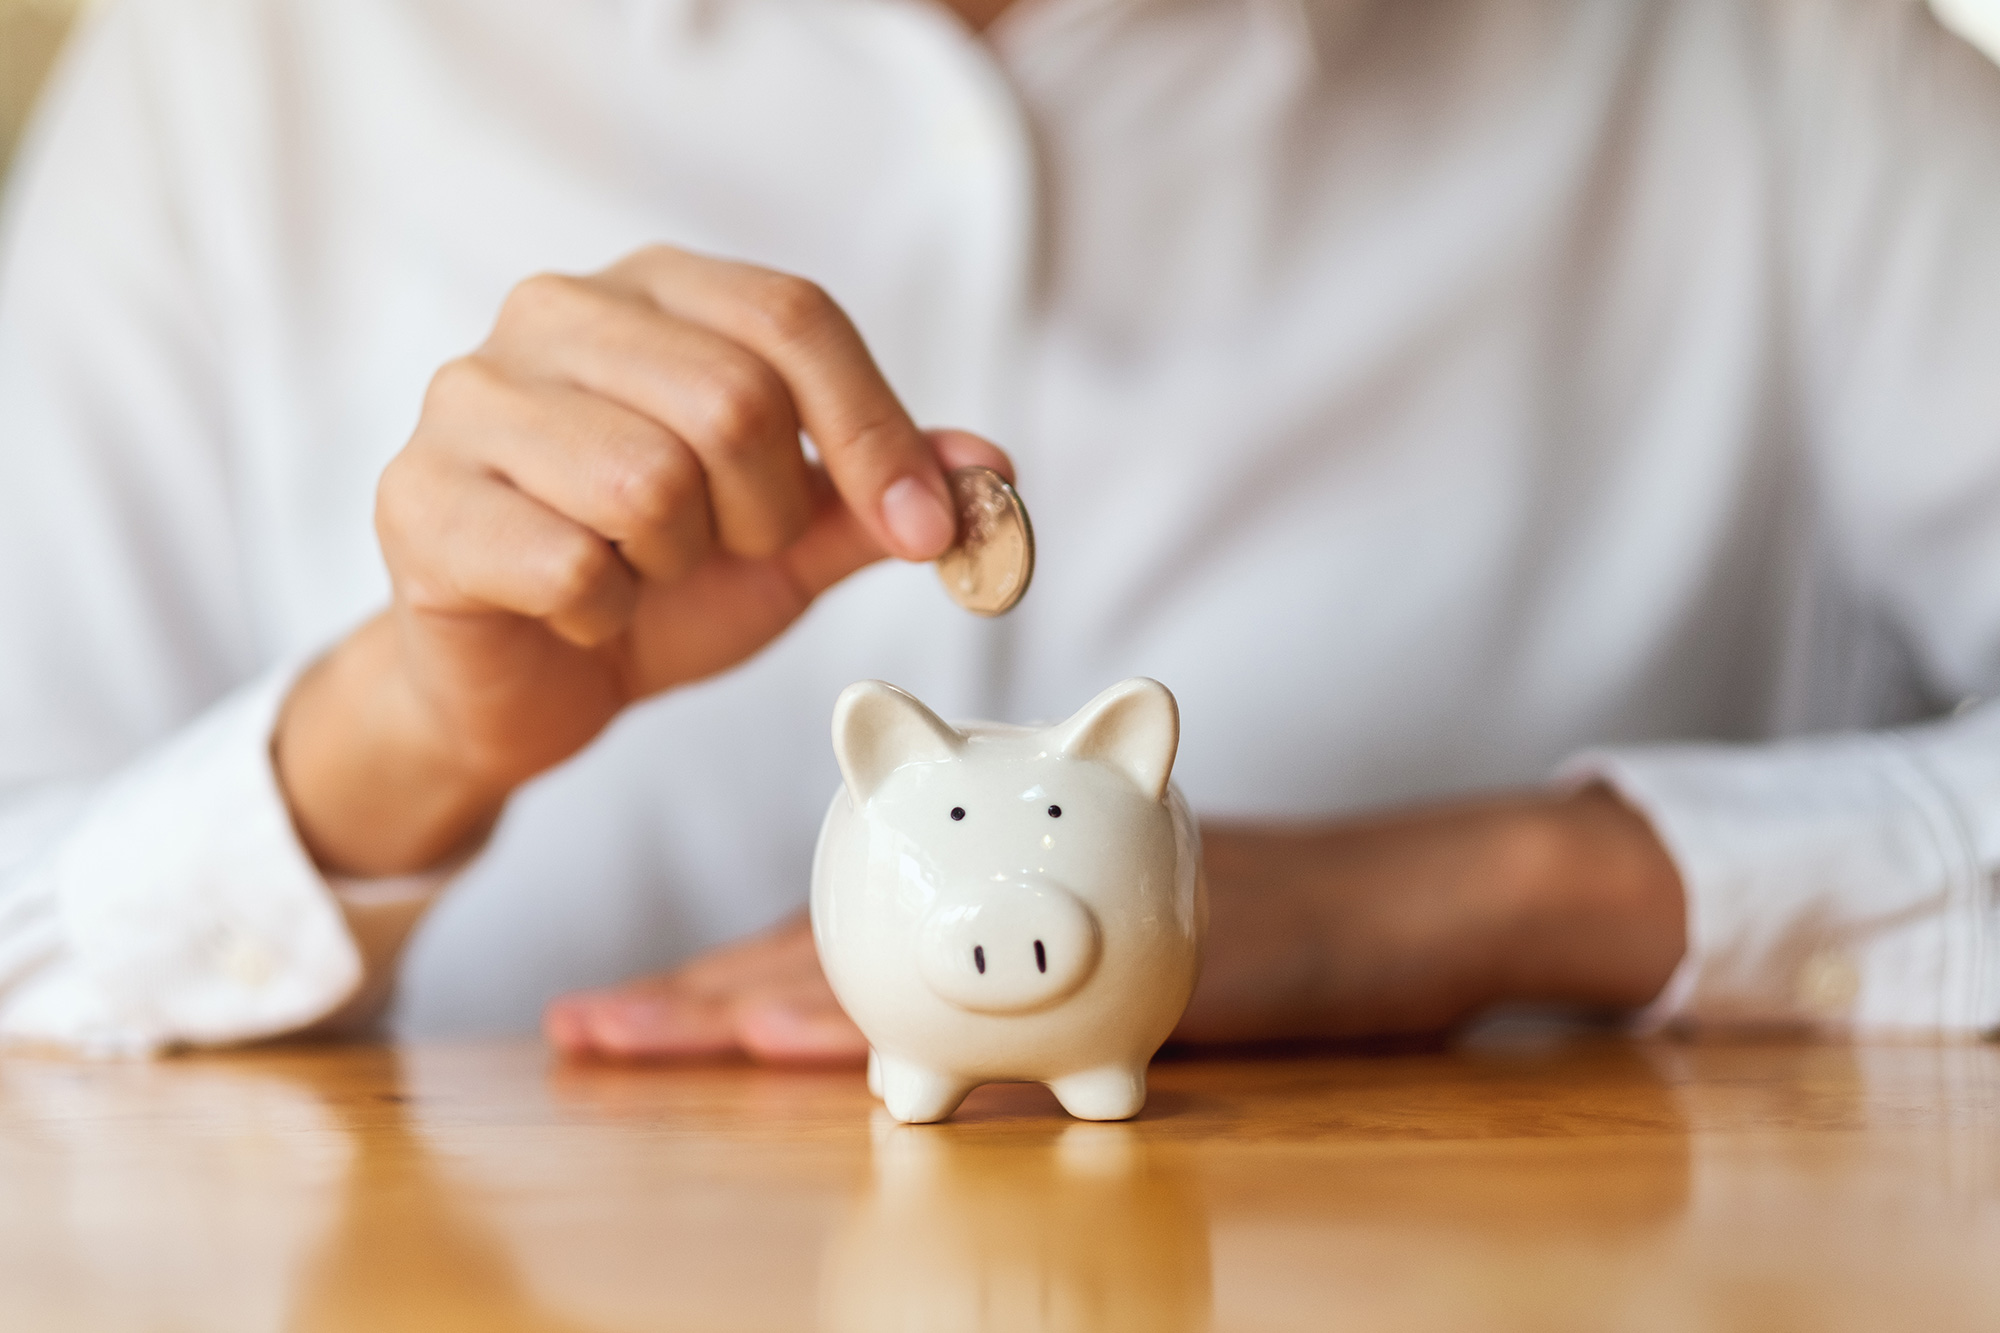 A hand holds a coin over a small, white piggy bank